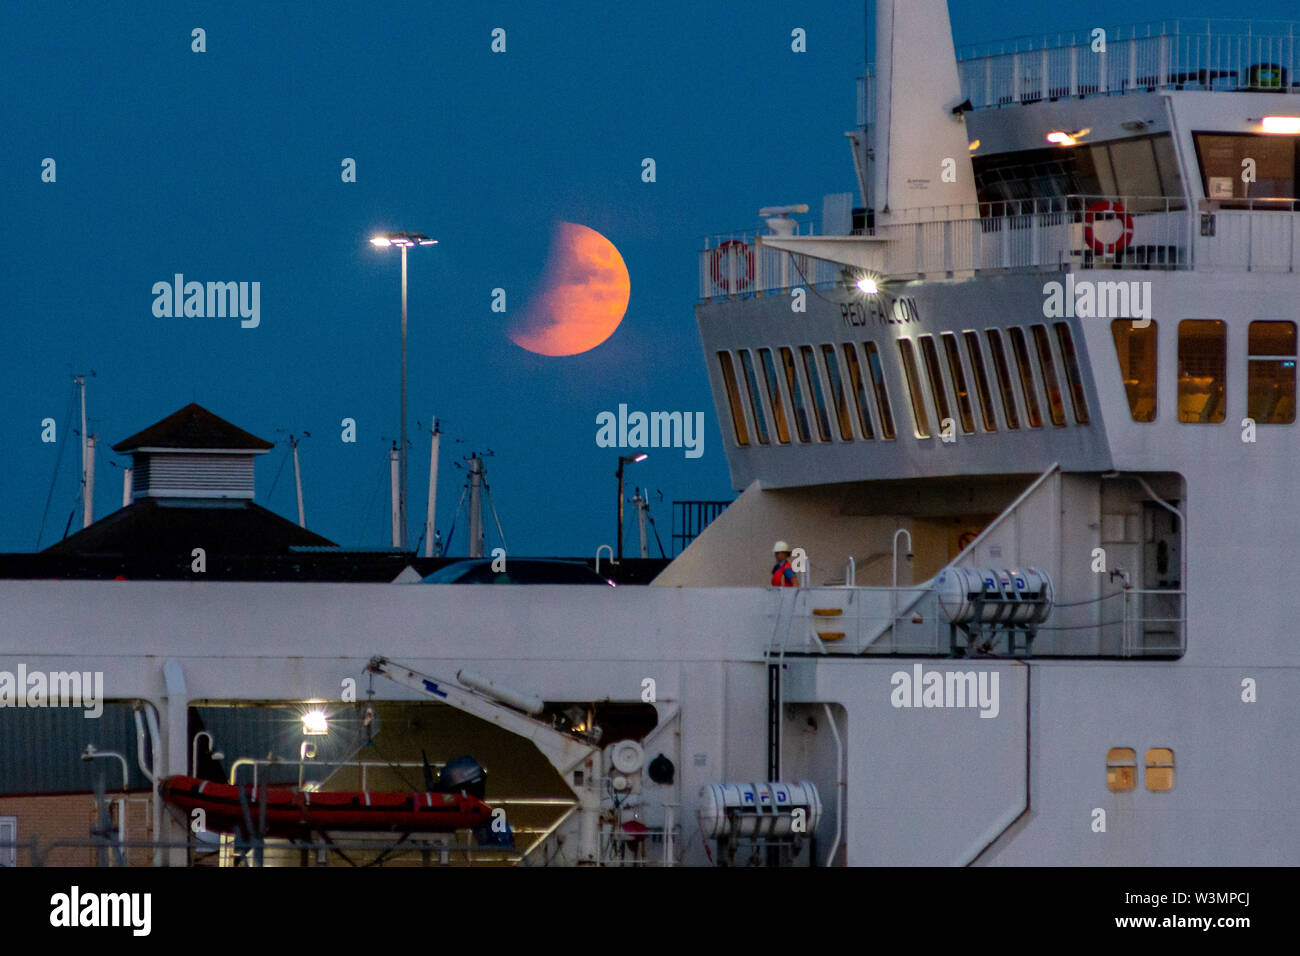 Partial lunar eclipse, Southampton, Hampshire, England, UK, 16th July 2019. A partial lunar eclipse and a hazy sky on the horizon turn the moon orange red during evening moonrise over the south coast. In the foreground, the Red Falcon Red Funnel Isle of Wight ferry has just docked in the port for disembarkation. Stock Photo